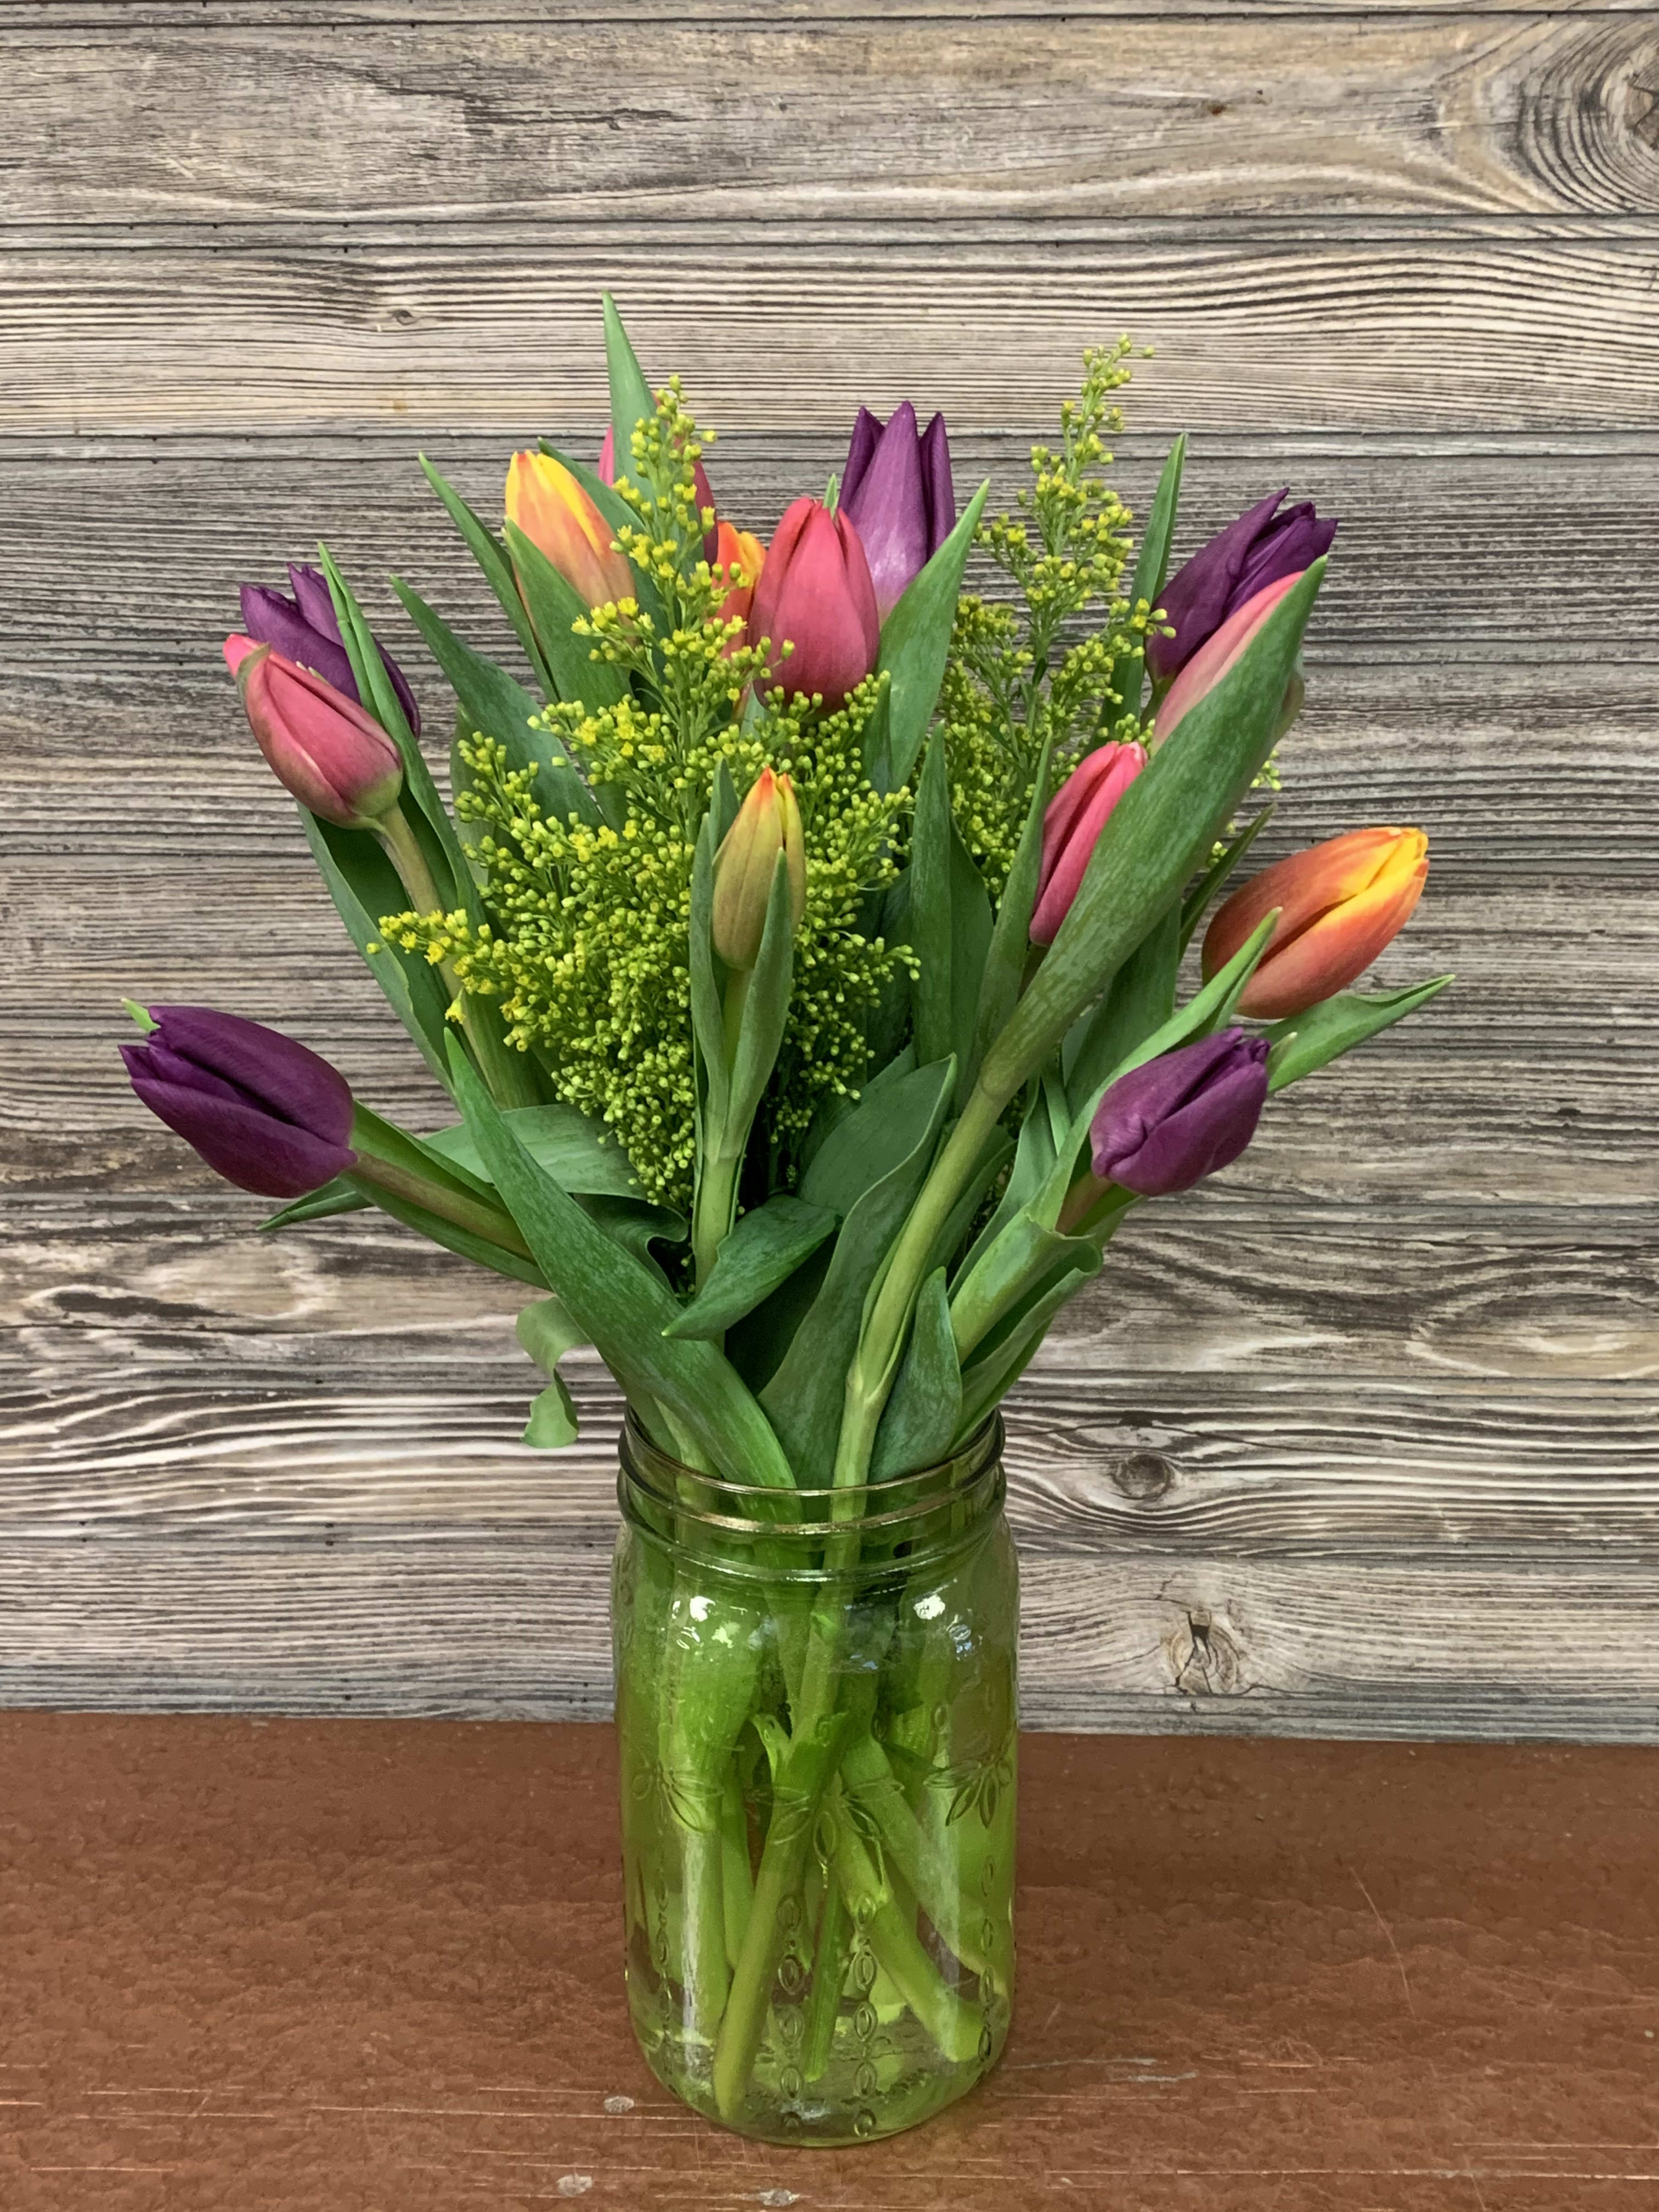 Tulip Mason Jar  - Standard 15 mixed regular and double tulips in a spring-colored mason jar accented with filler and a touch of greenery.  